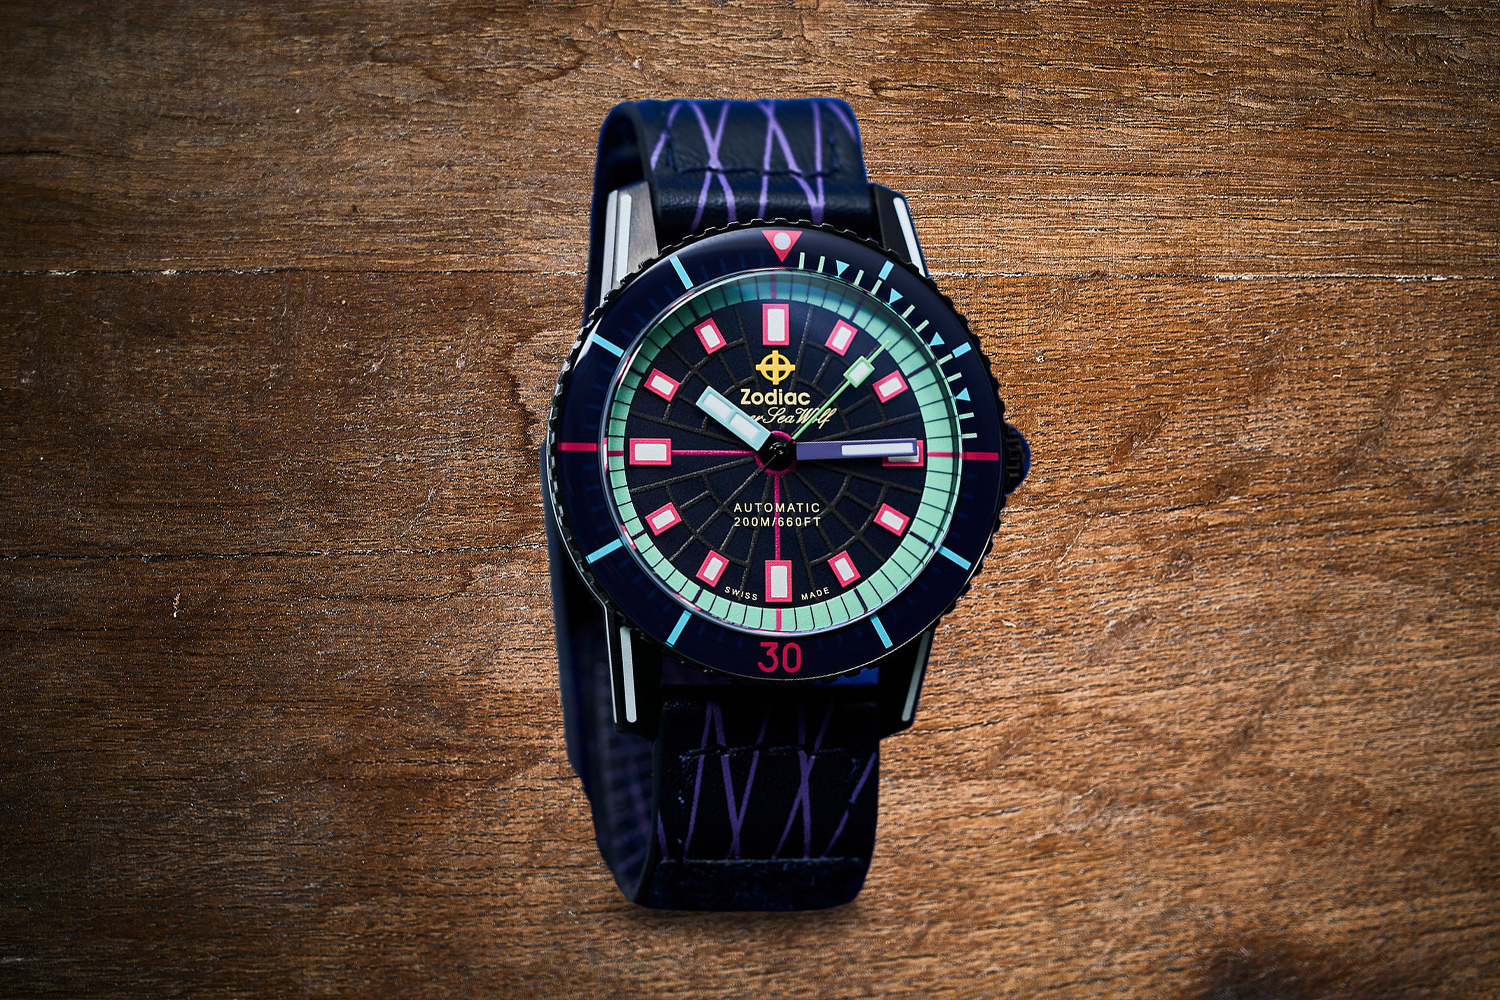 Black, blue, purple and pink watch